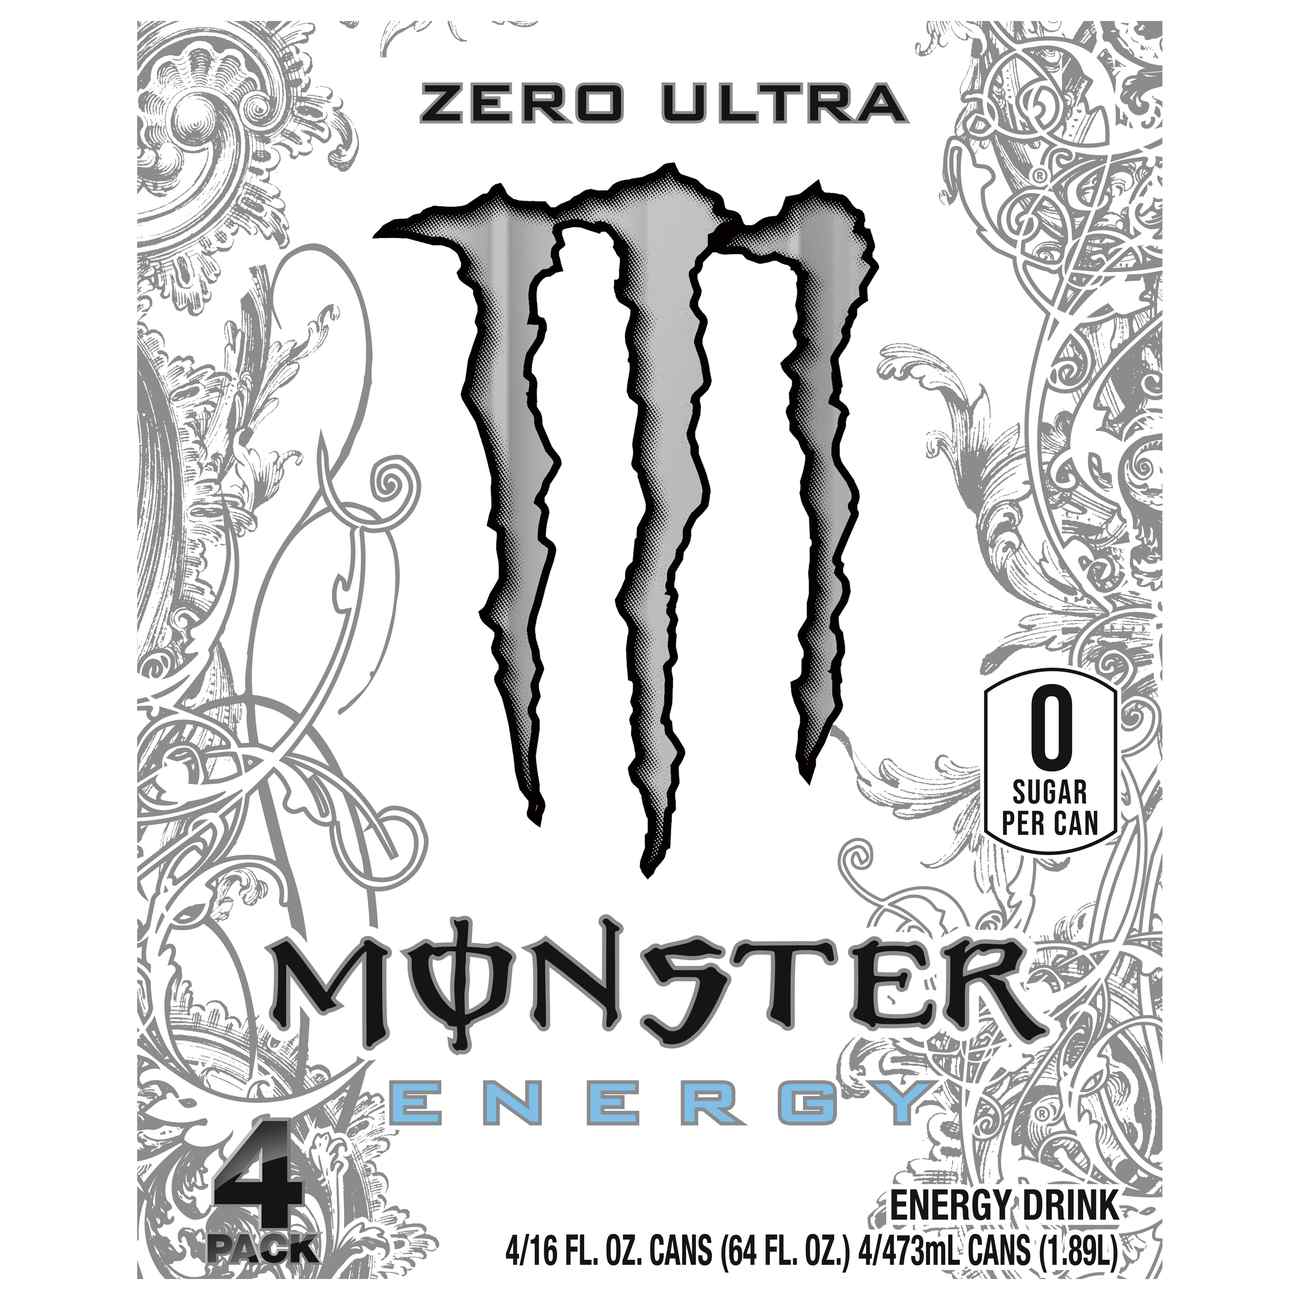 Monster Energy Zero Ultra Sugar Free Energy Drink 16 oz Cans; image 1 of 3